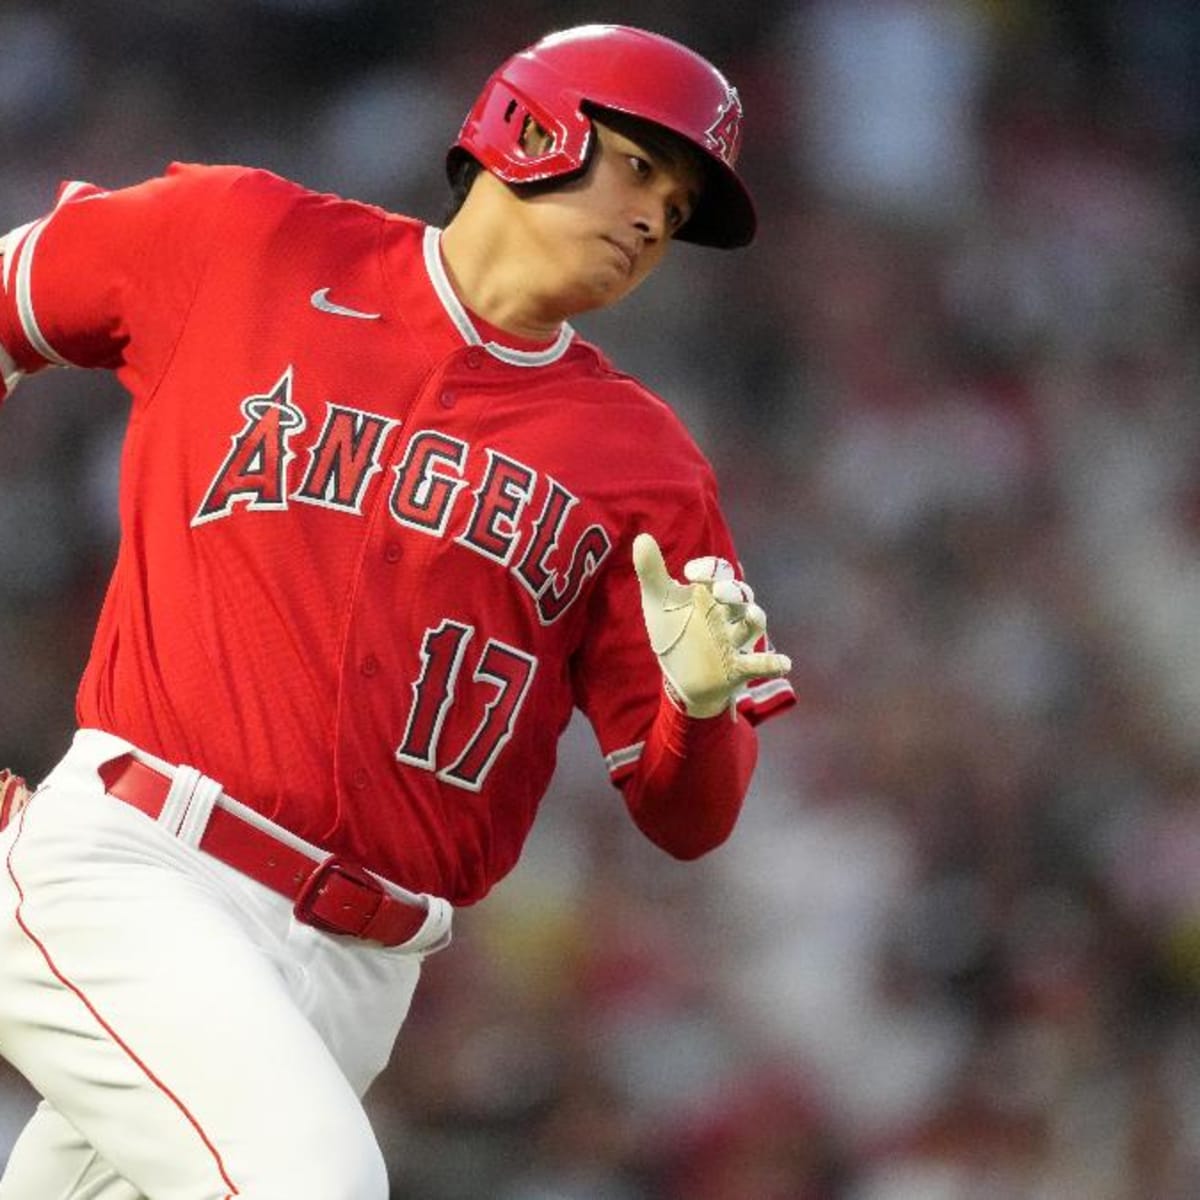 Red Sox notebook: Angels superstar Shohei Ohtani uncertain to